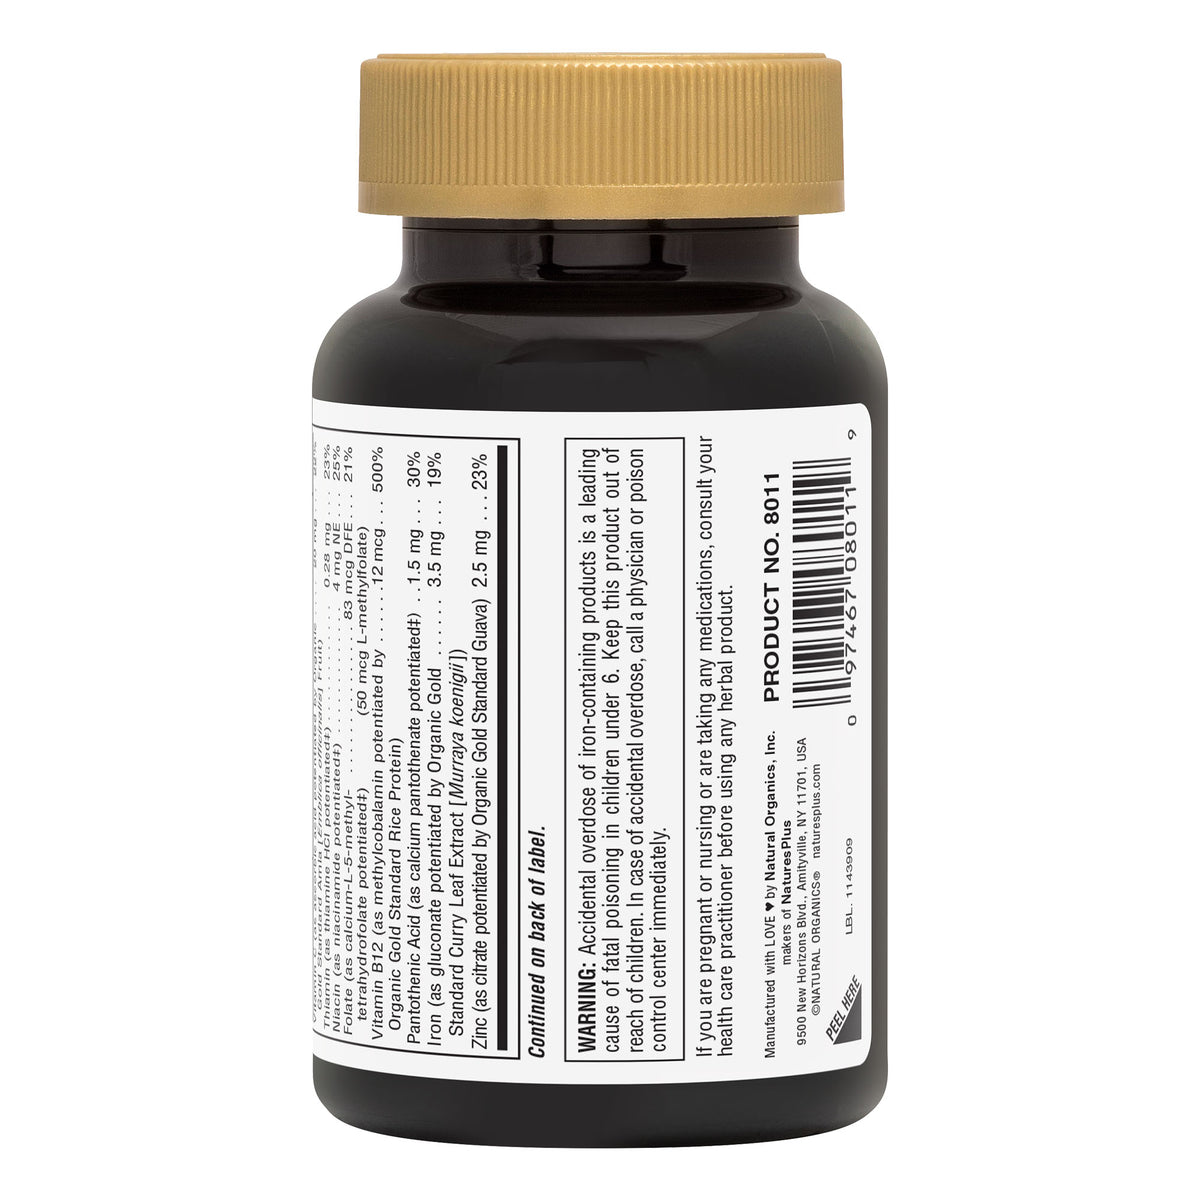 product image of AgeLoss® Brain Support Capsules containing AgeLoss® Brain Support Capsules